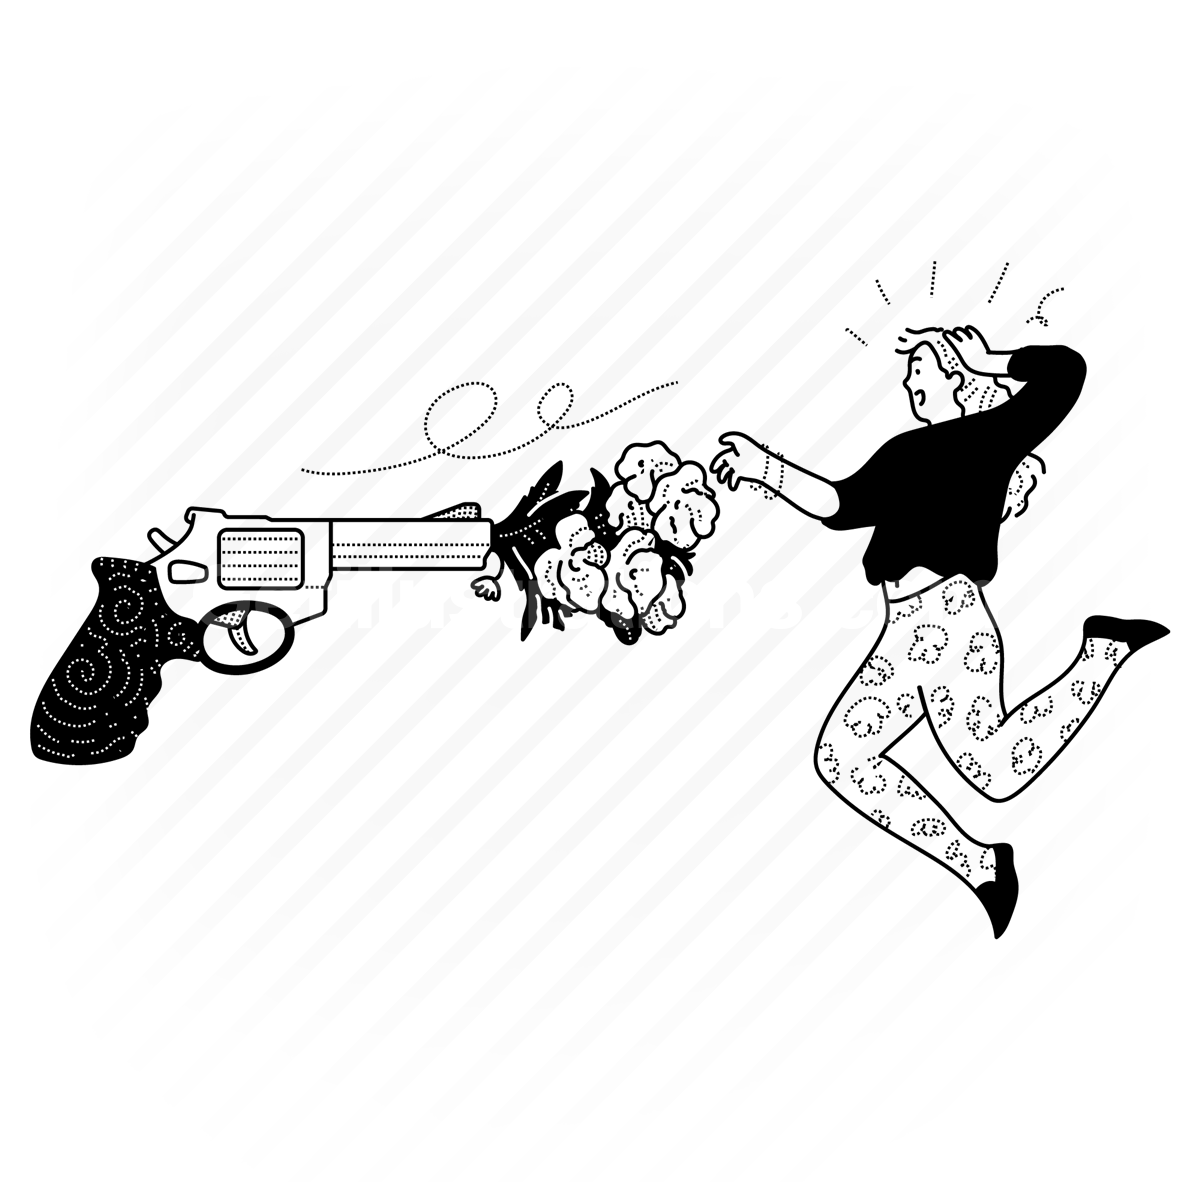 violence, gun, social issue, girl, weapon, violent, flower, love, peace, peaceful